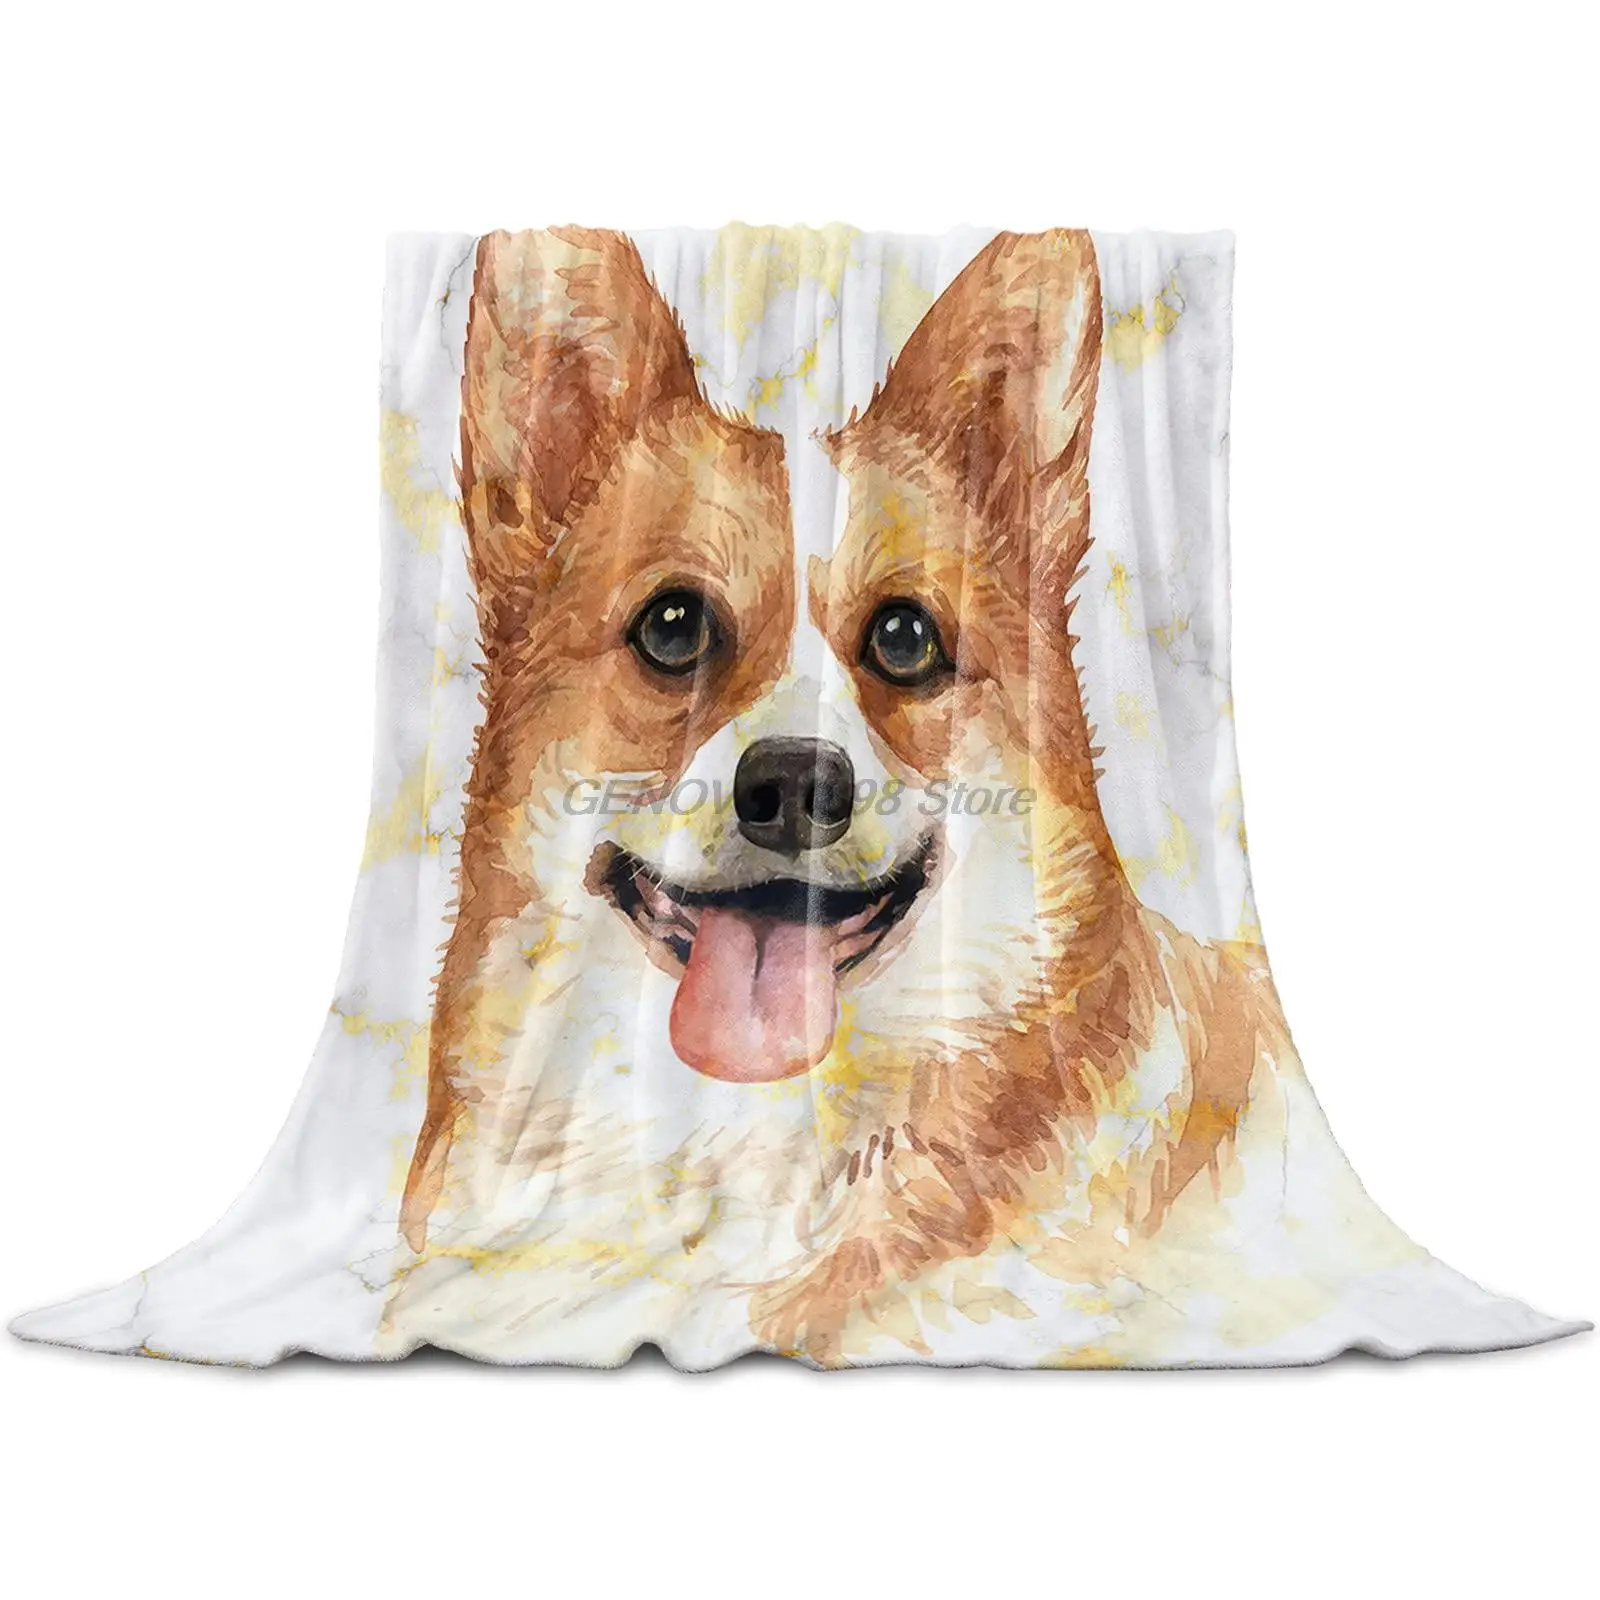 

Fleece Throw Blanket Full Size, Lovely Pet Dog Animal Marble Pattern Lightweight Flannel Blankets for Couch Bed Living Room, Wa